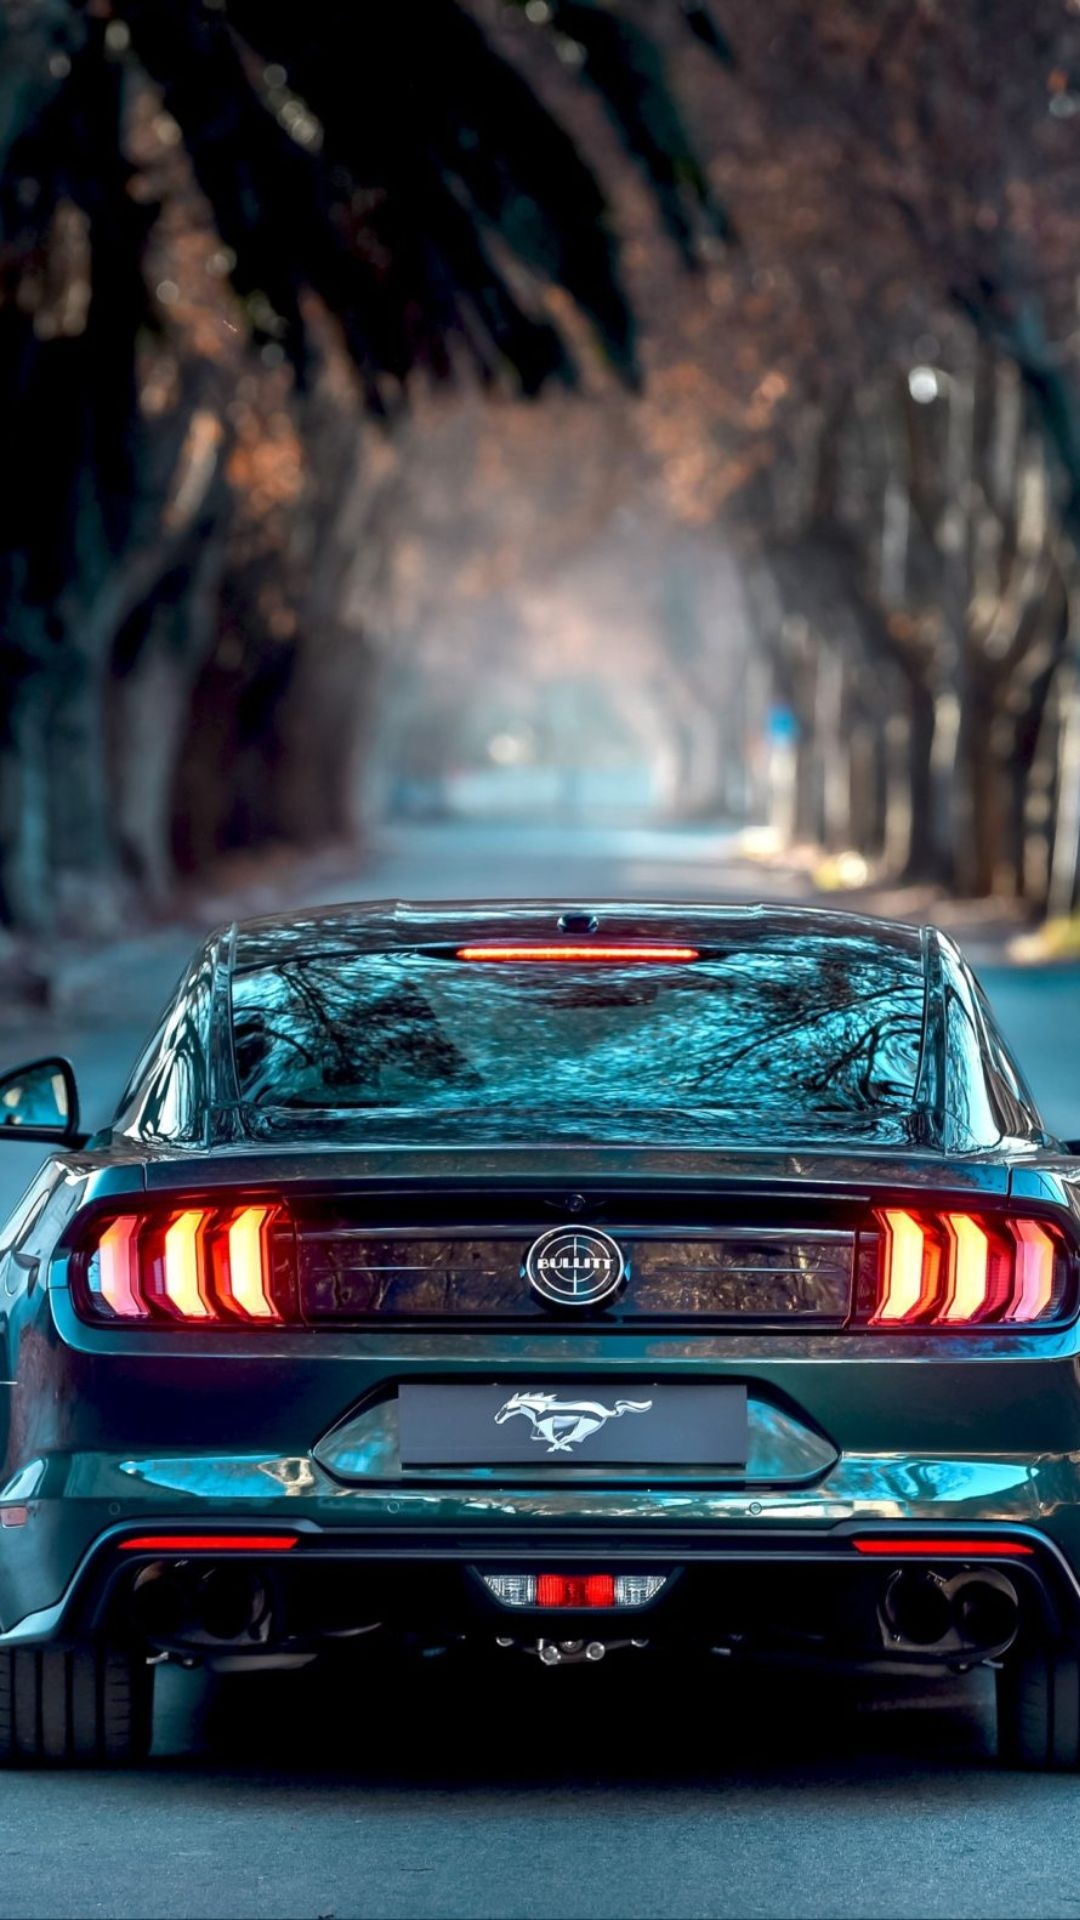 Mustang array, Power and beauty, Muscle car variety, High-quality captures, Road dominance, 1080x1920 Full HD Phone